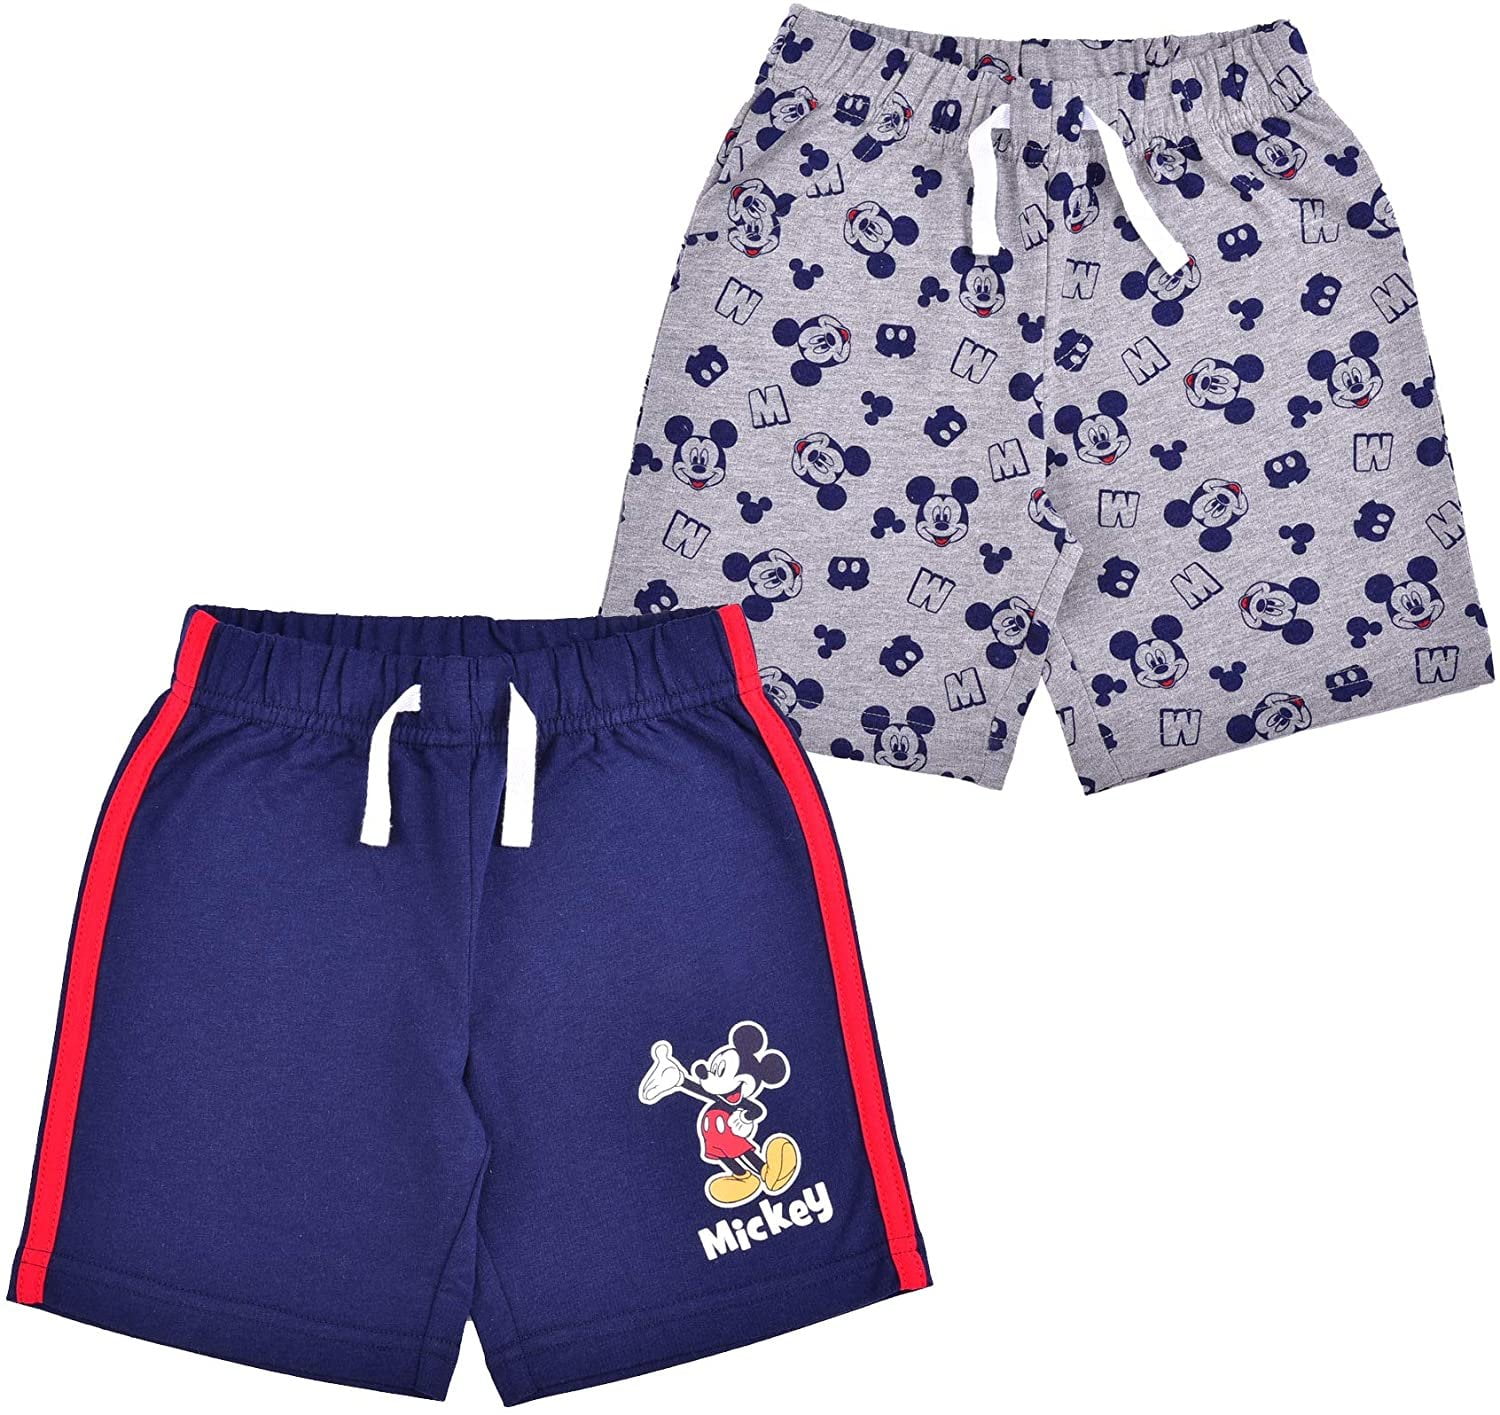 NEW Carter's Boys Blue Shorts NWT 3T 5T 6 year French Terry Drawstring 